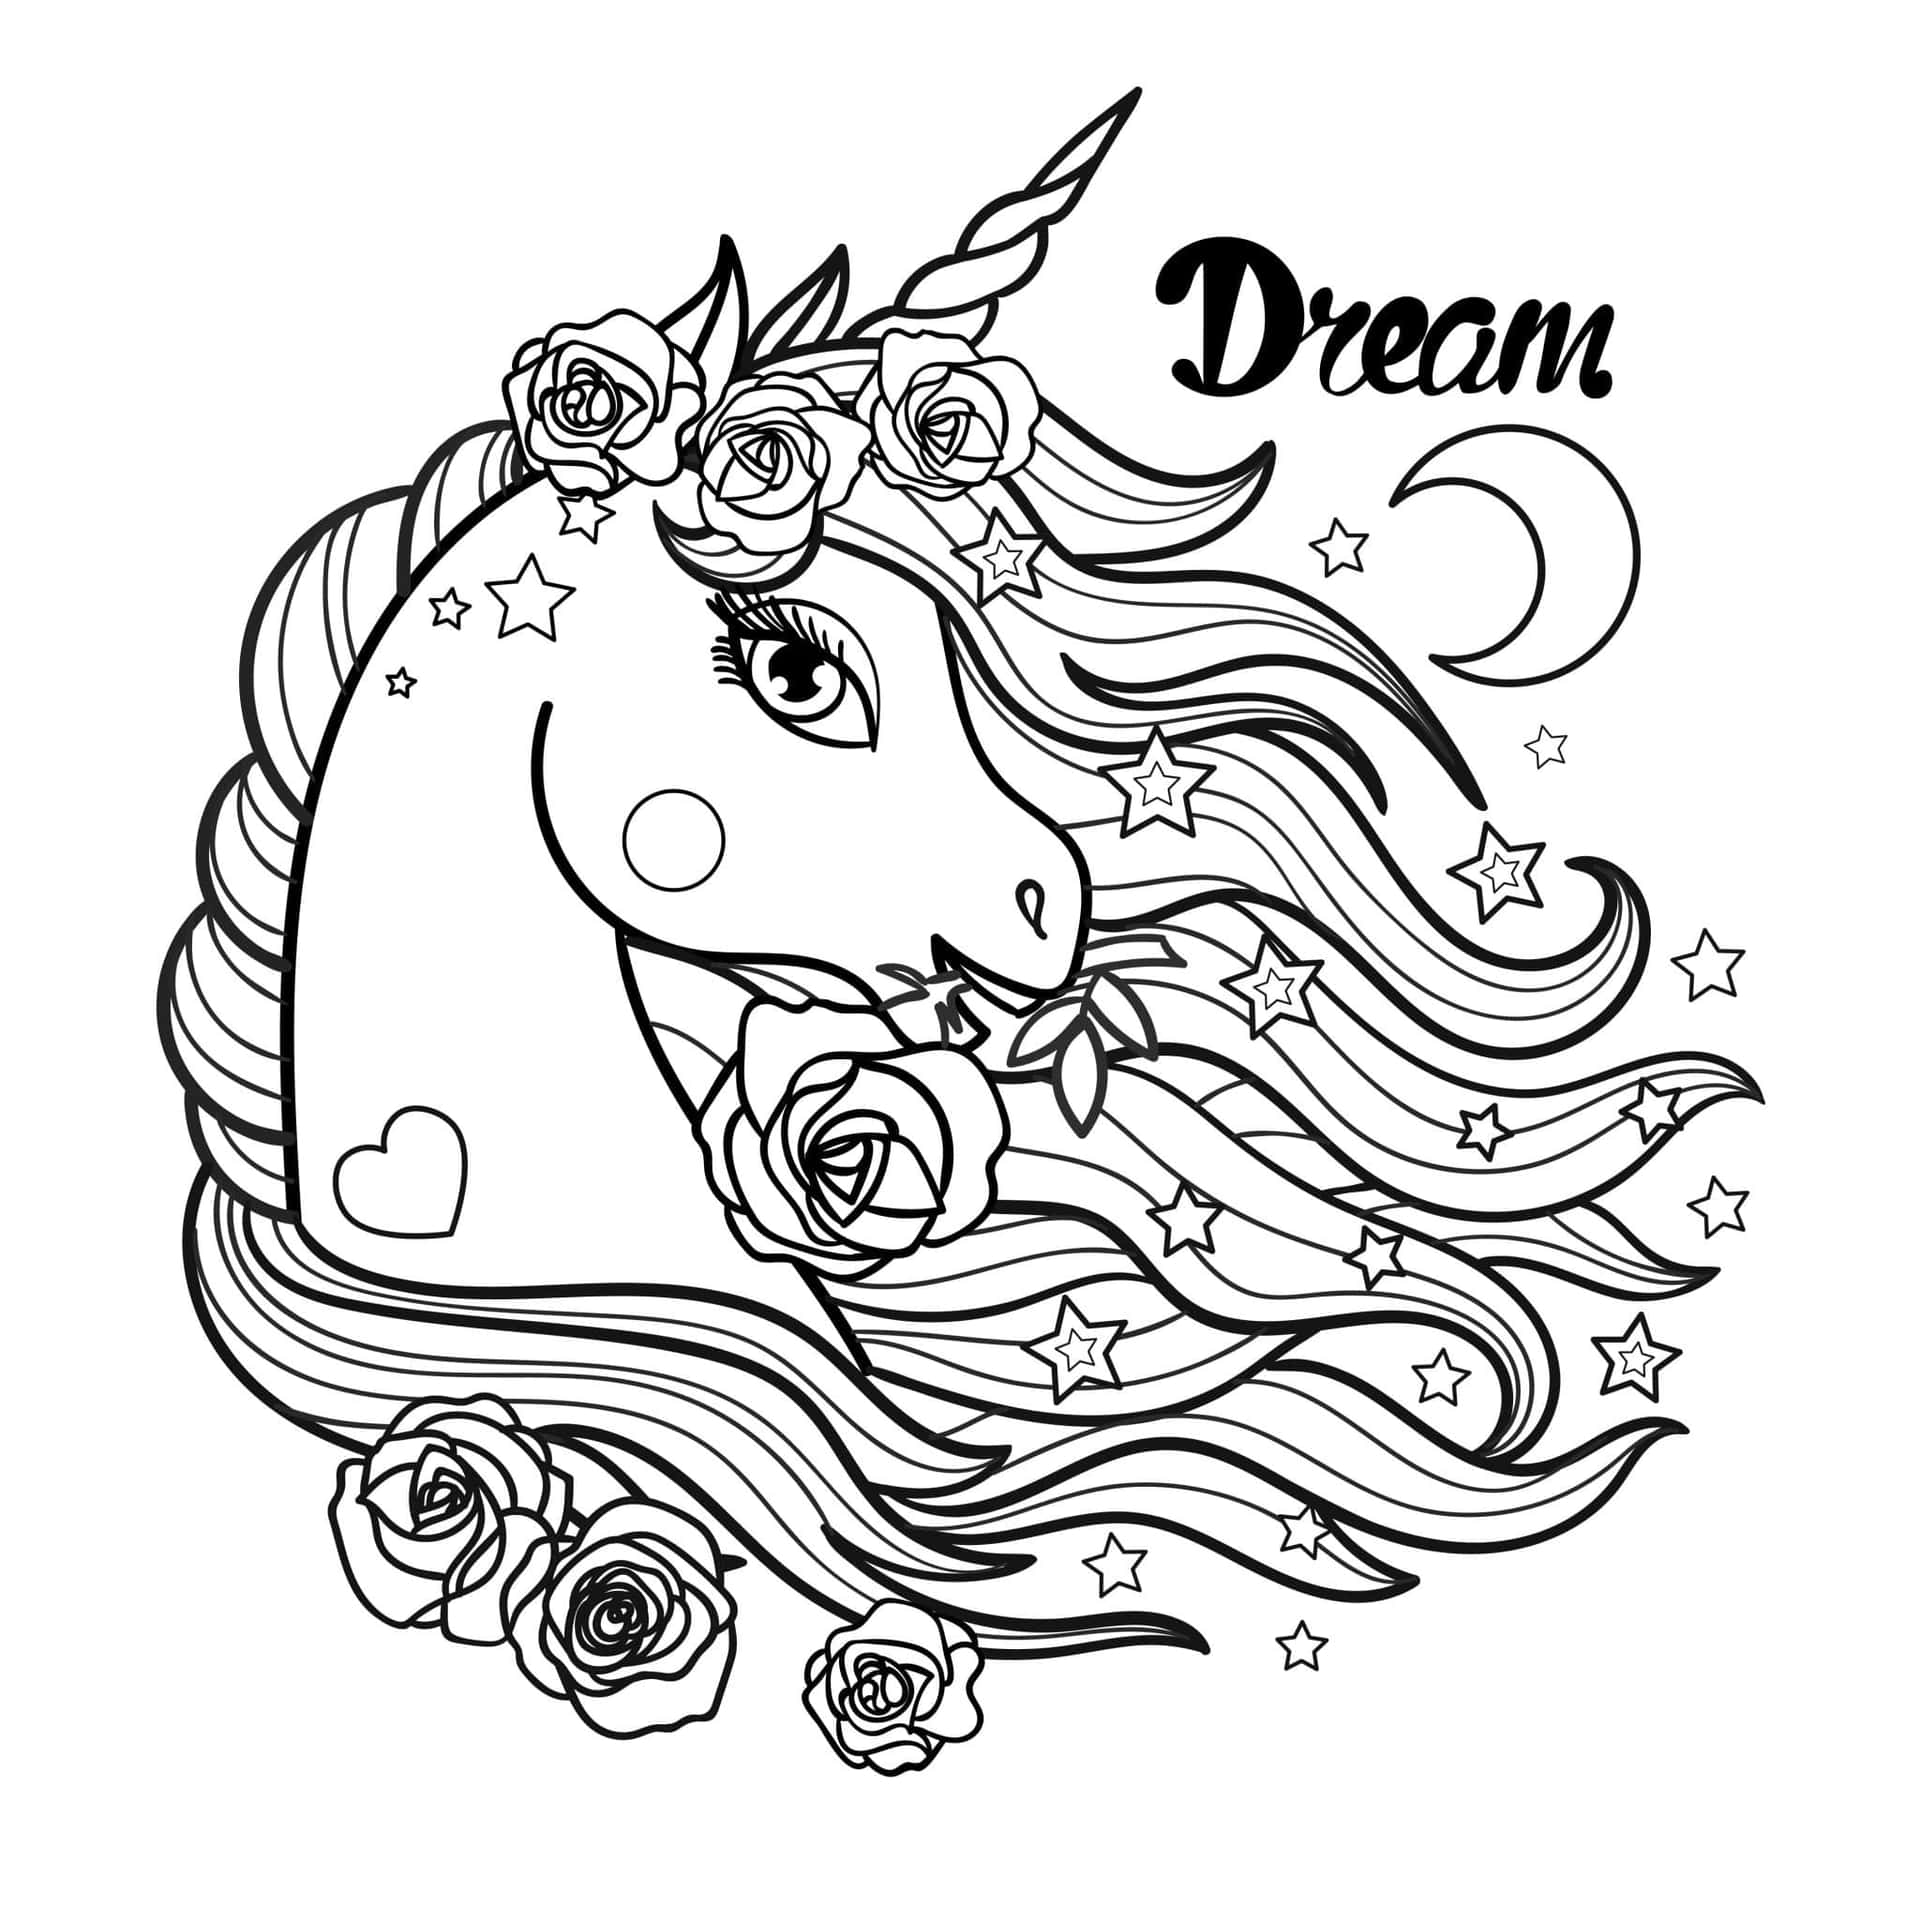 Cute Unicorn I Drawing by Sipporah Art and Illustration - Pixels-saigonsouth.com.vn